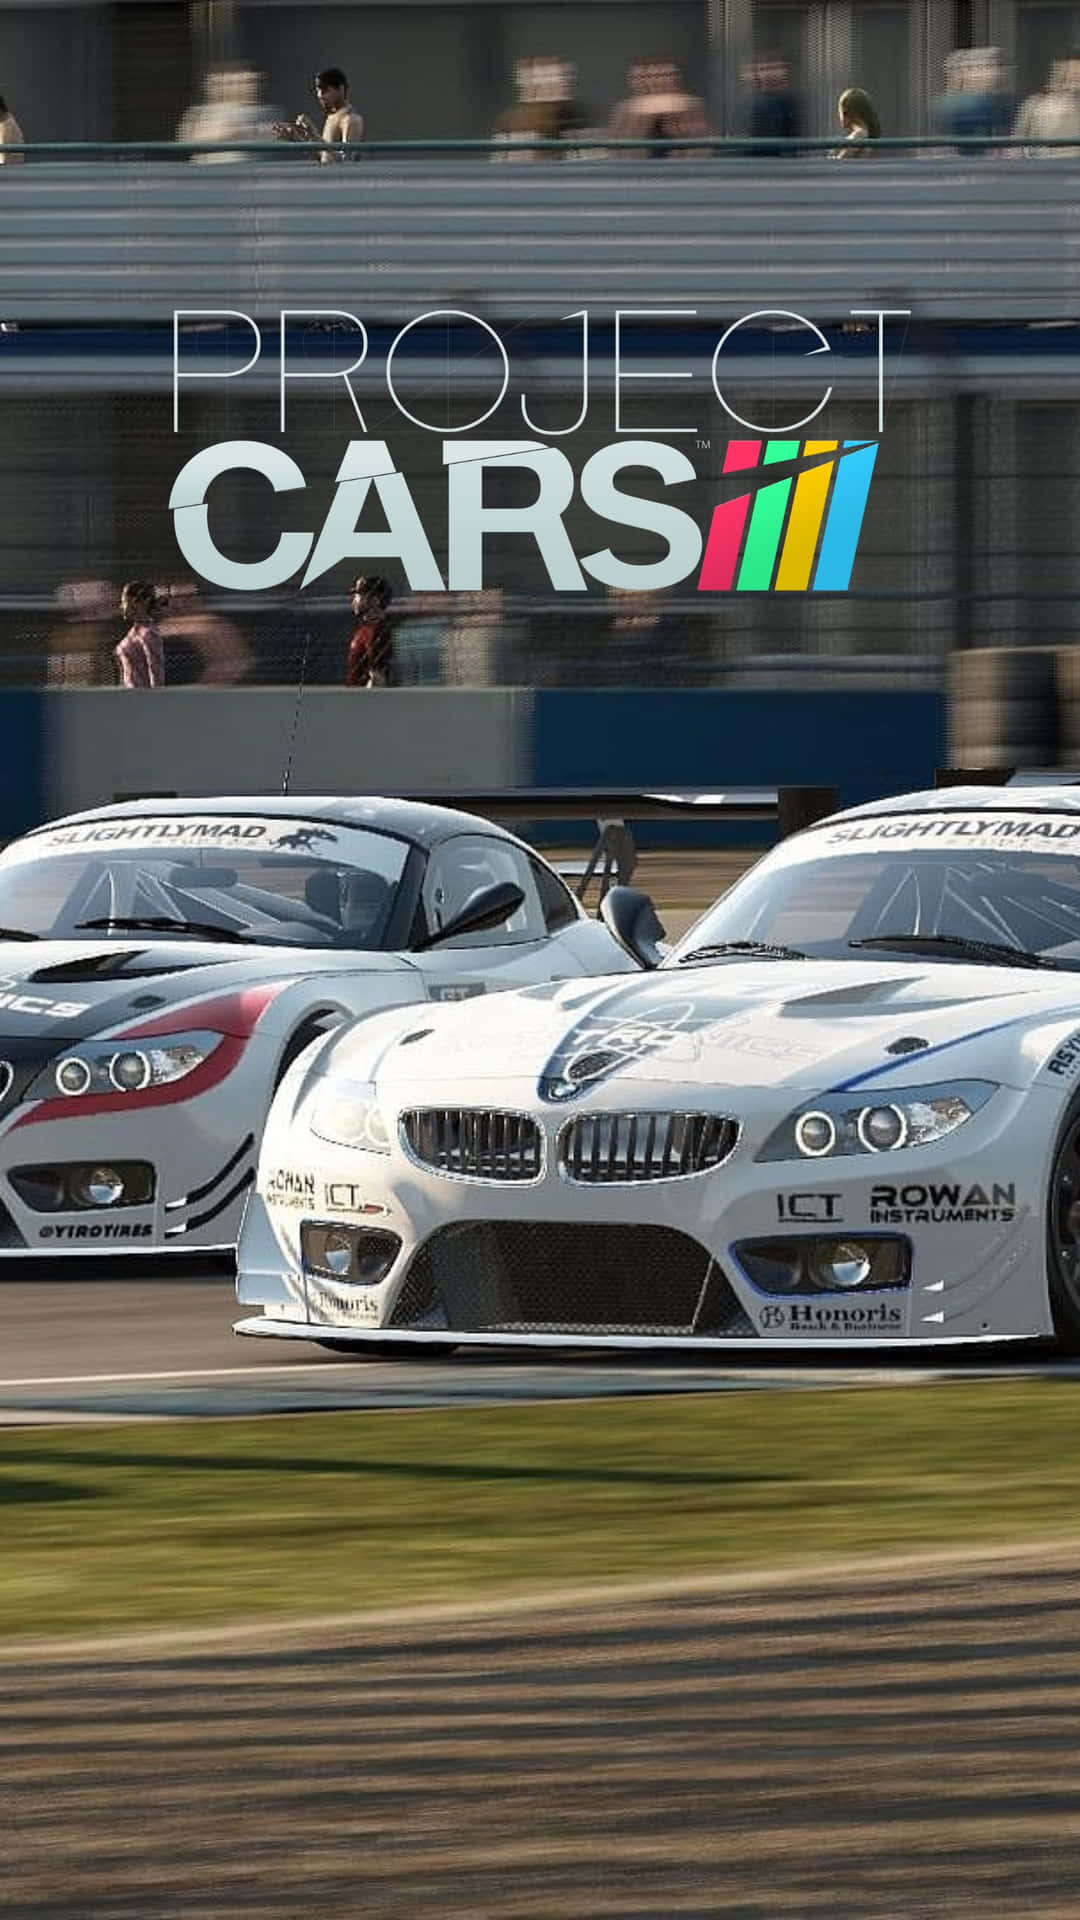 Project Cars Iii Pc - Pc Game Download